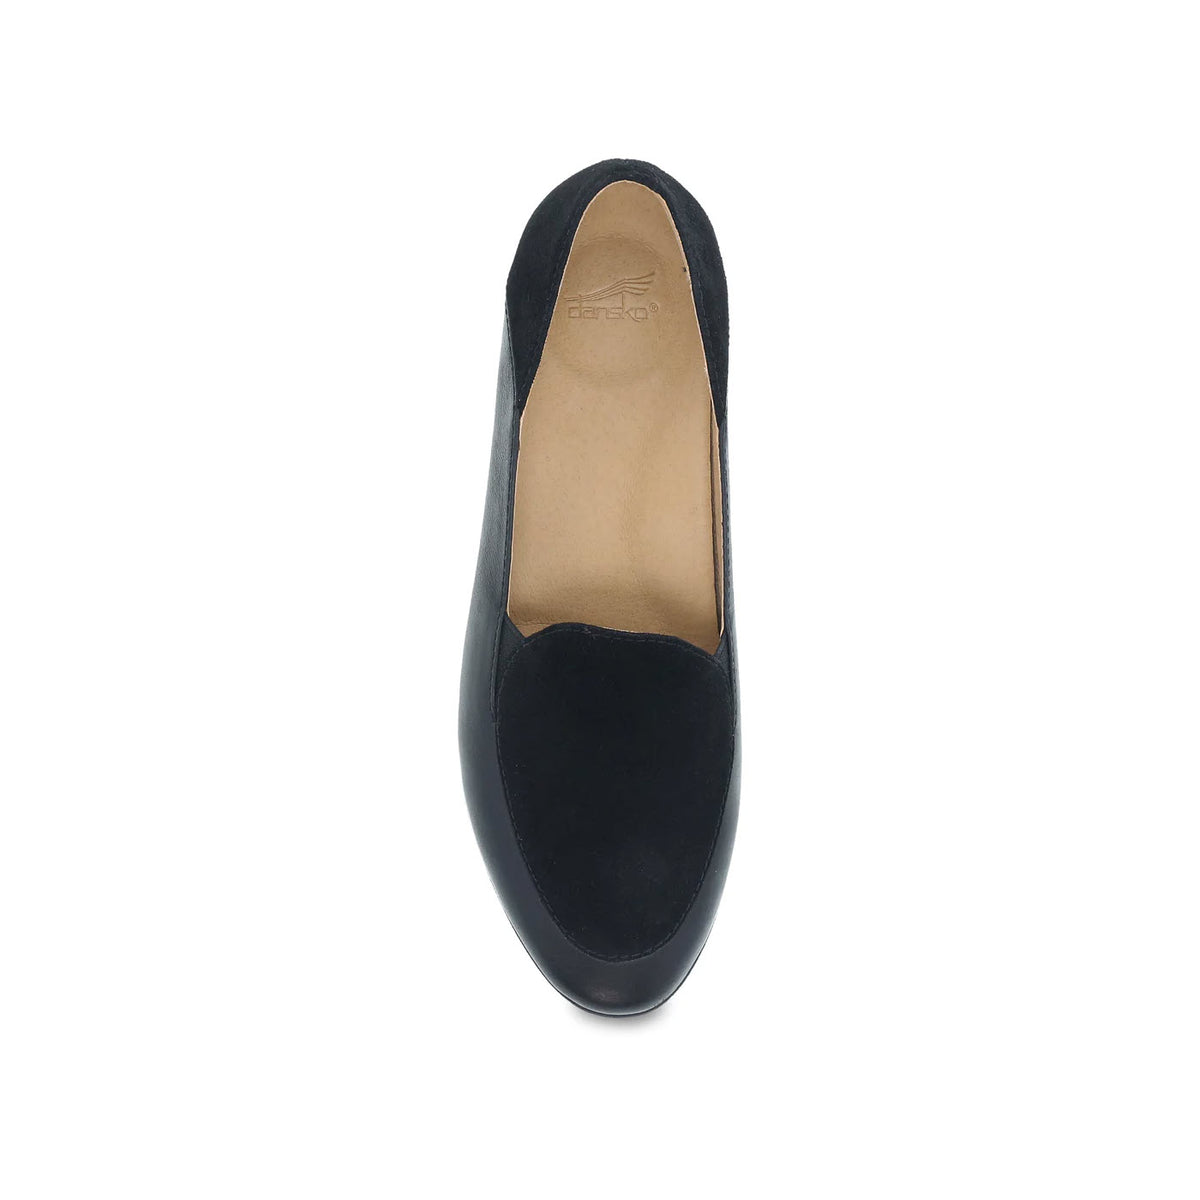 Top view of a single Dansko black suede moc loafer on a white background.